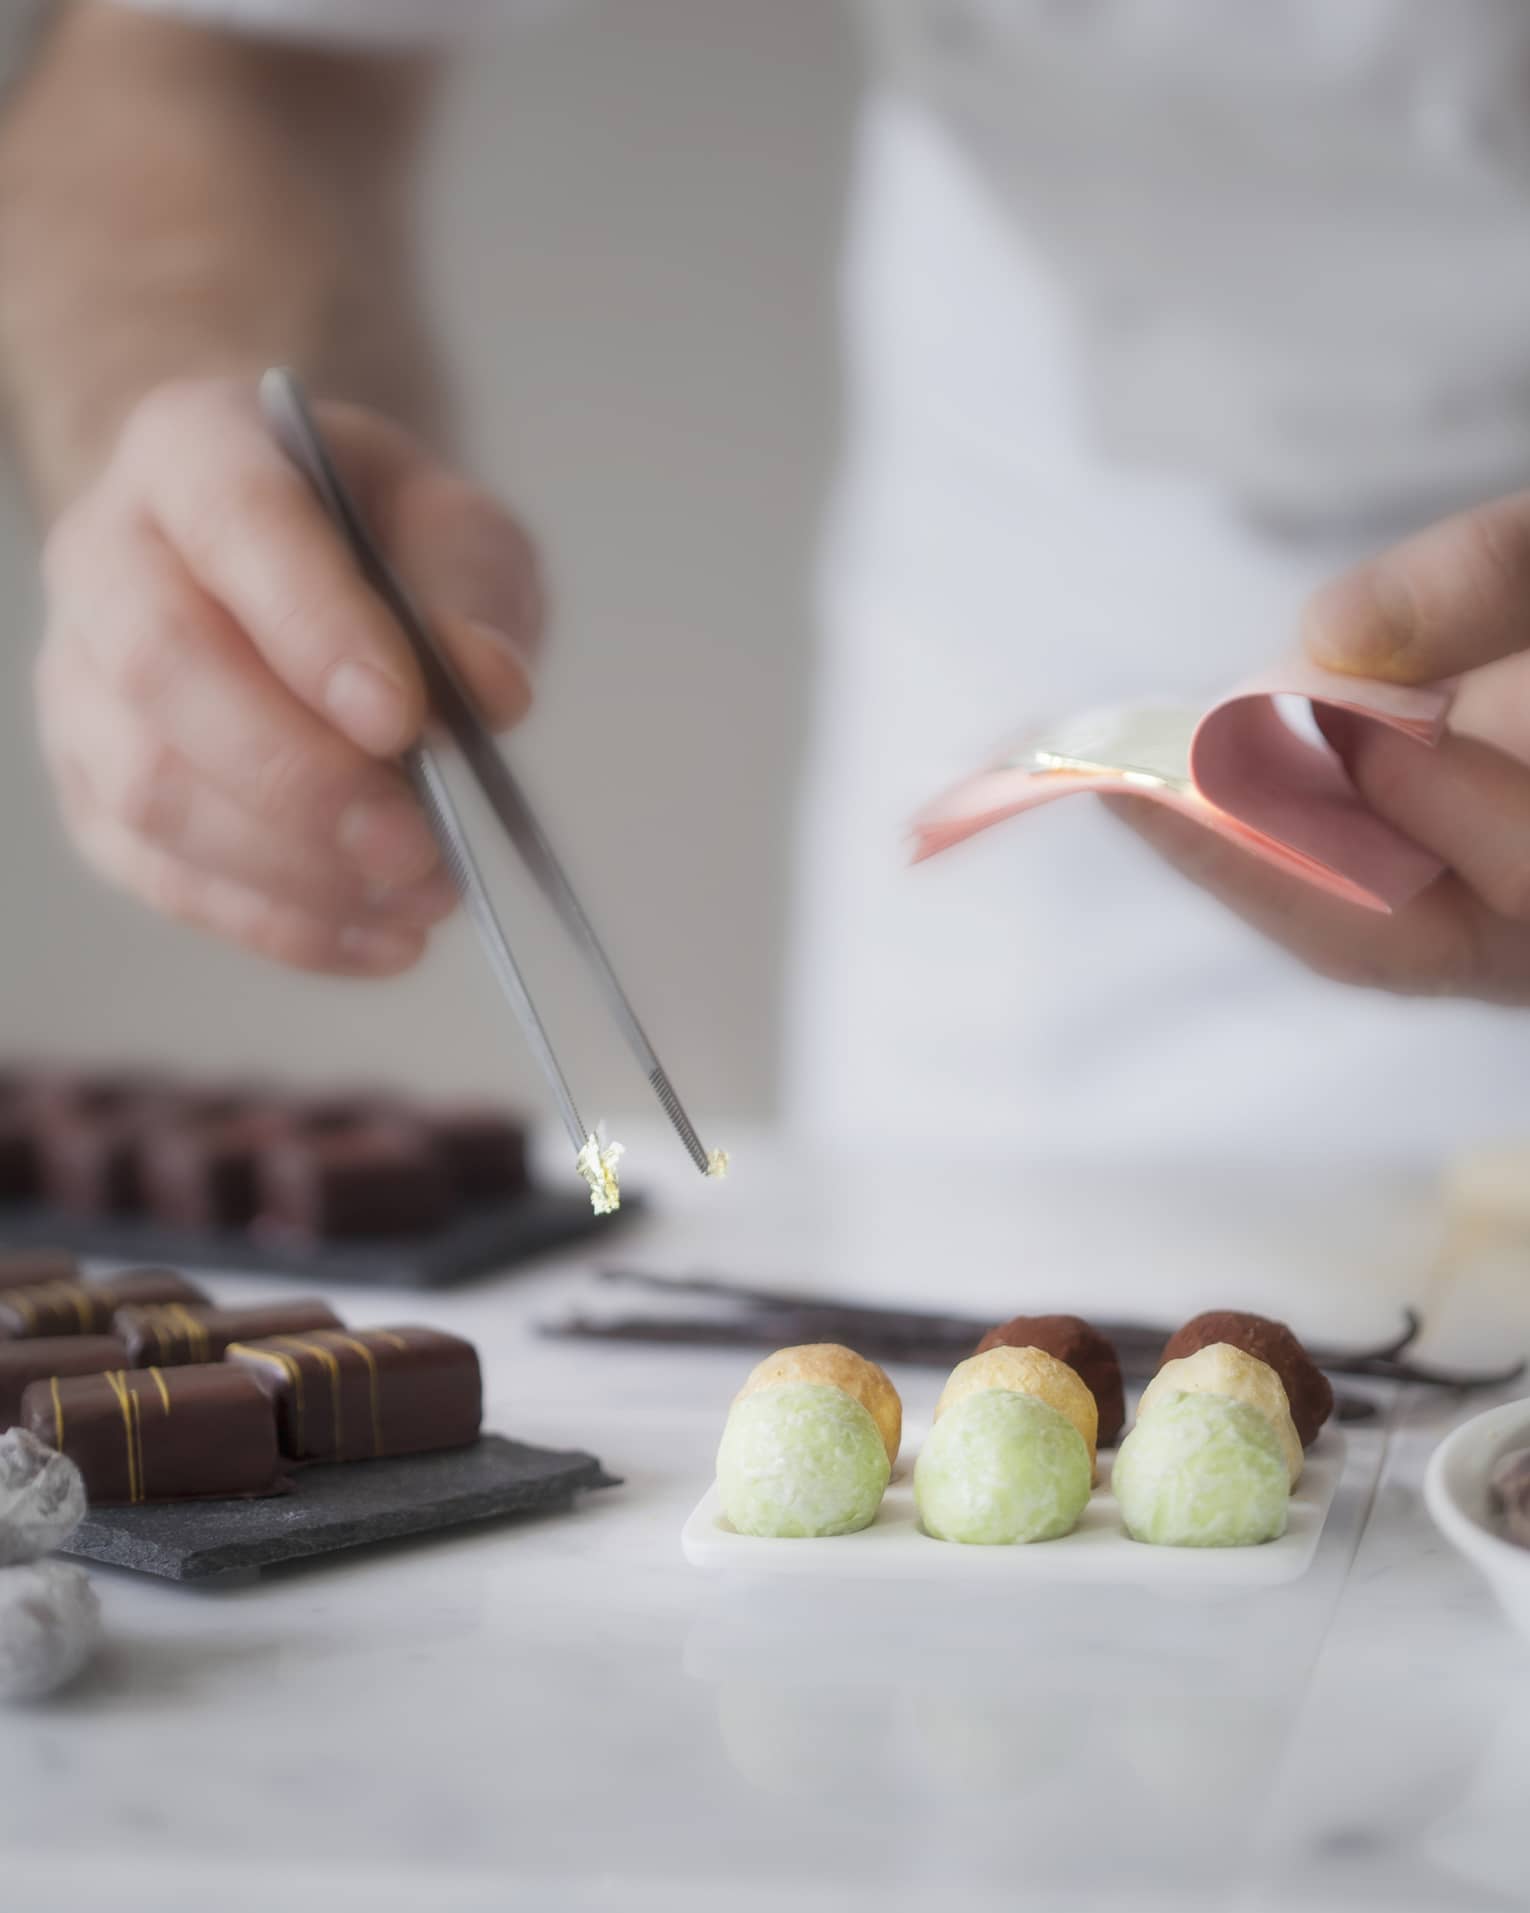 A close up of a male chef's hands using tongs to place various chocolates on parchment paper